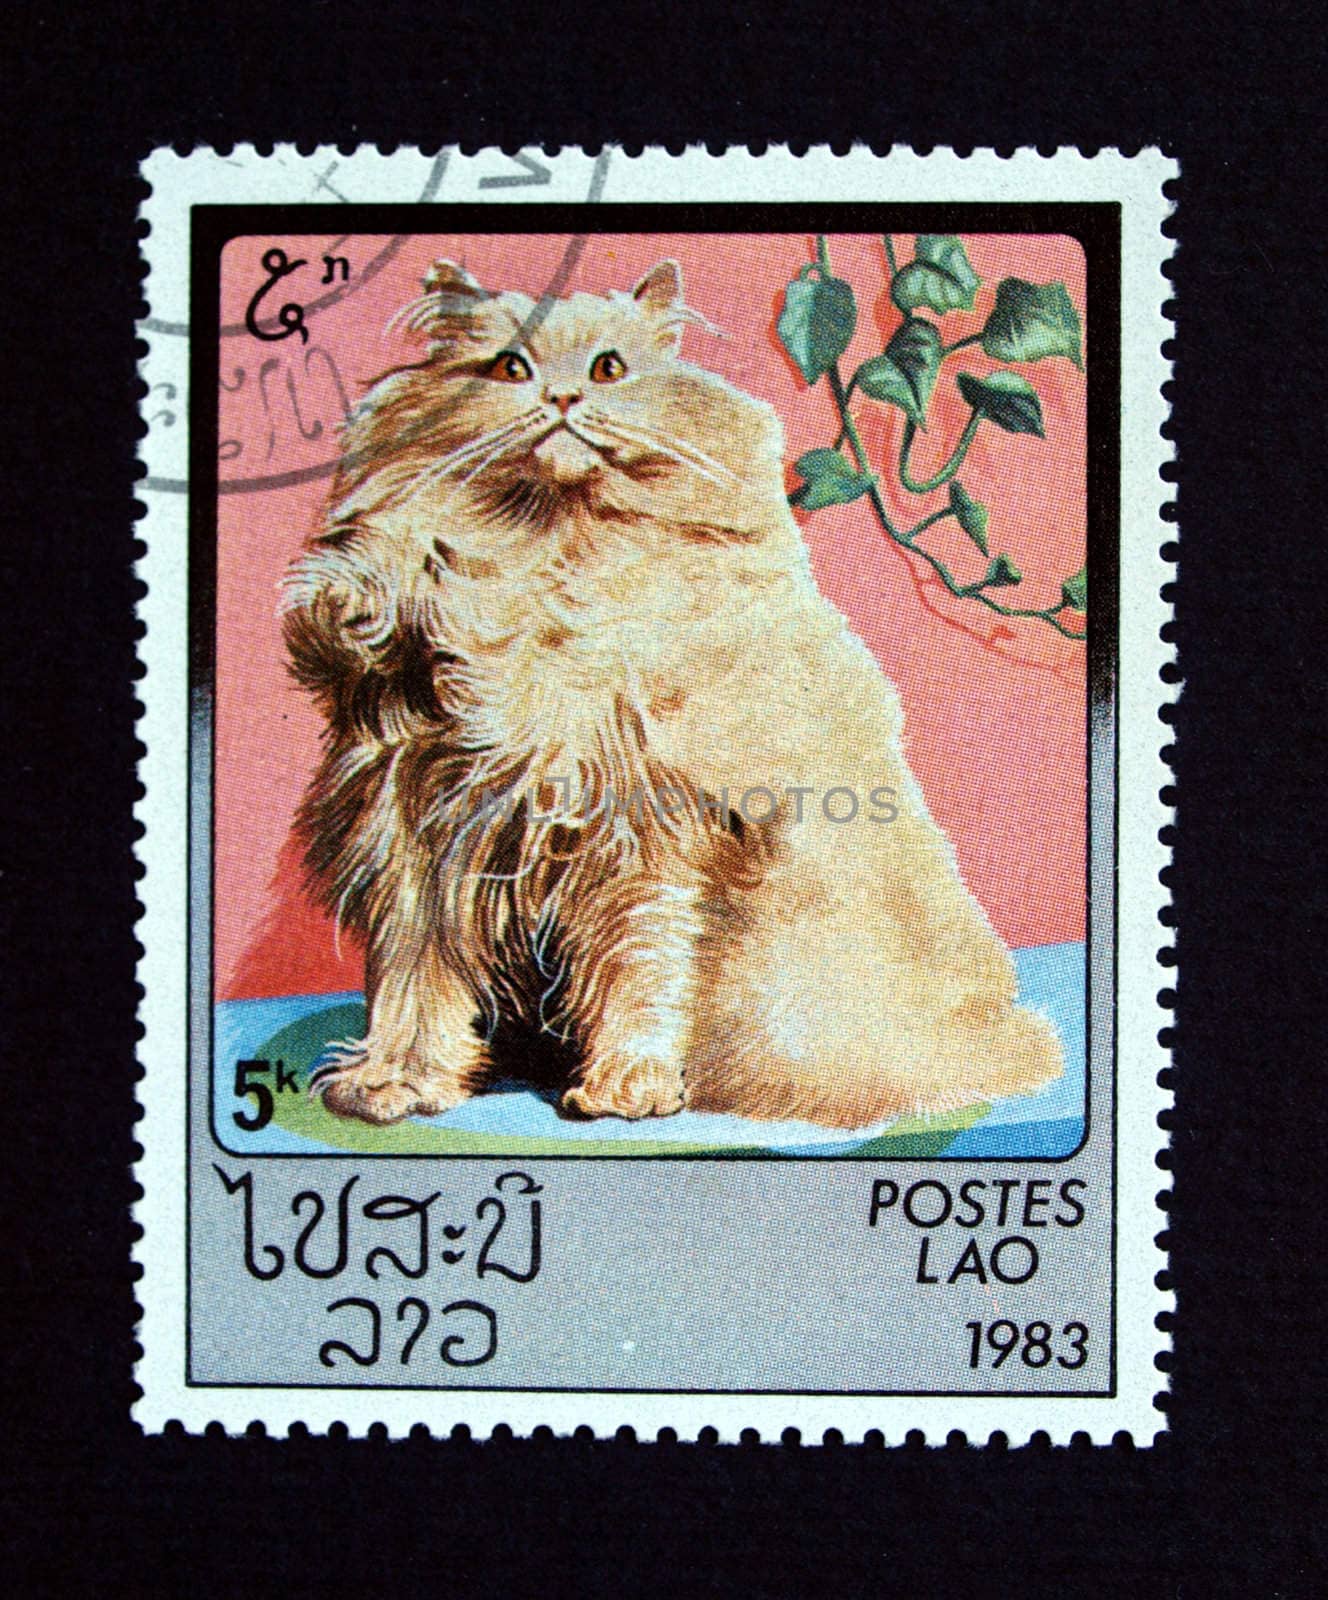 Lao stamp with cat by paolo77